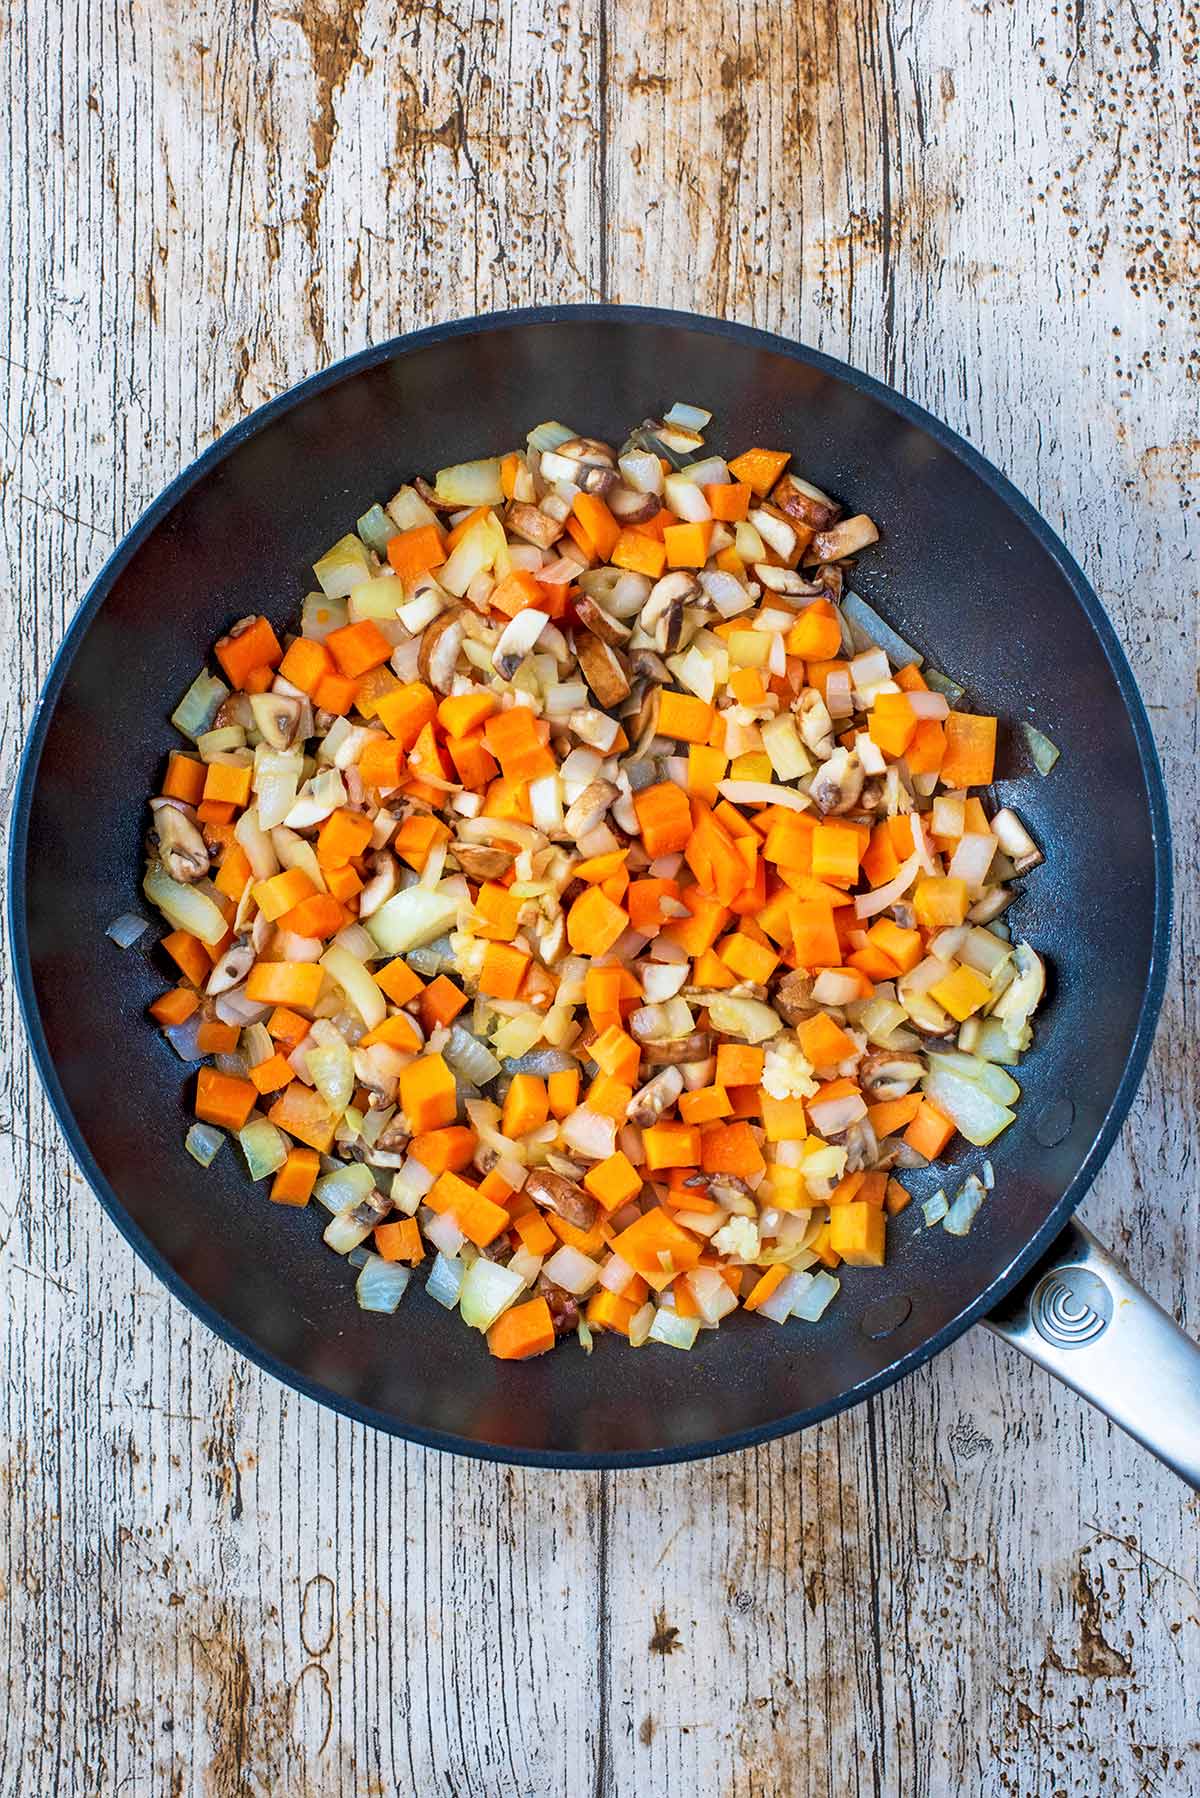 A frying pan with chopped carrot, onion, mushrooms and garlic.